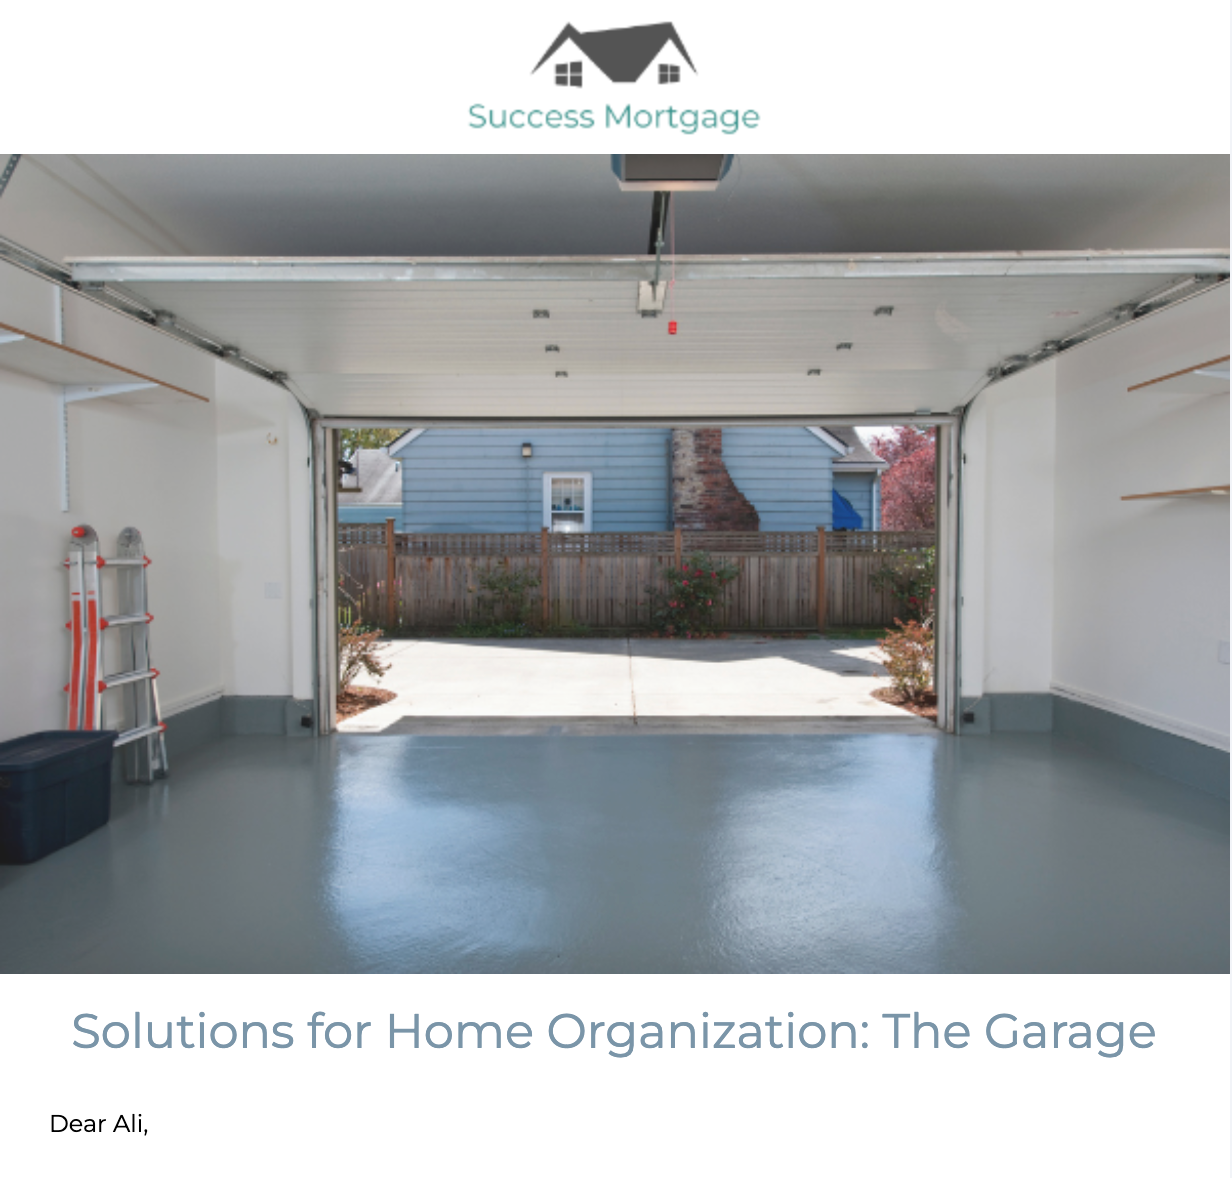 Solutions for Home Organization: The Garage